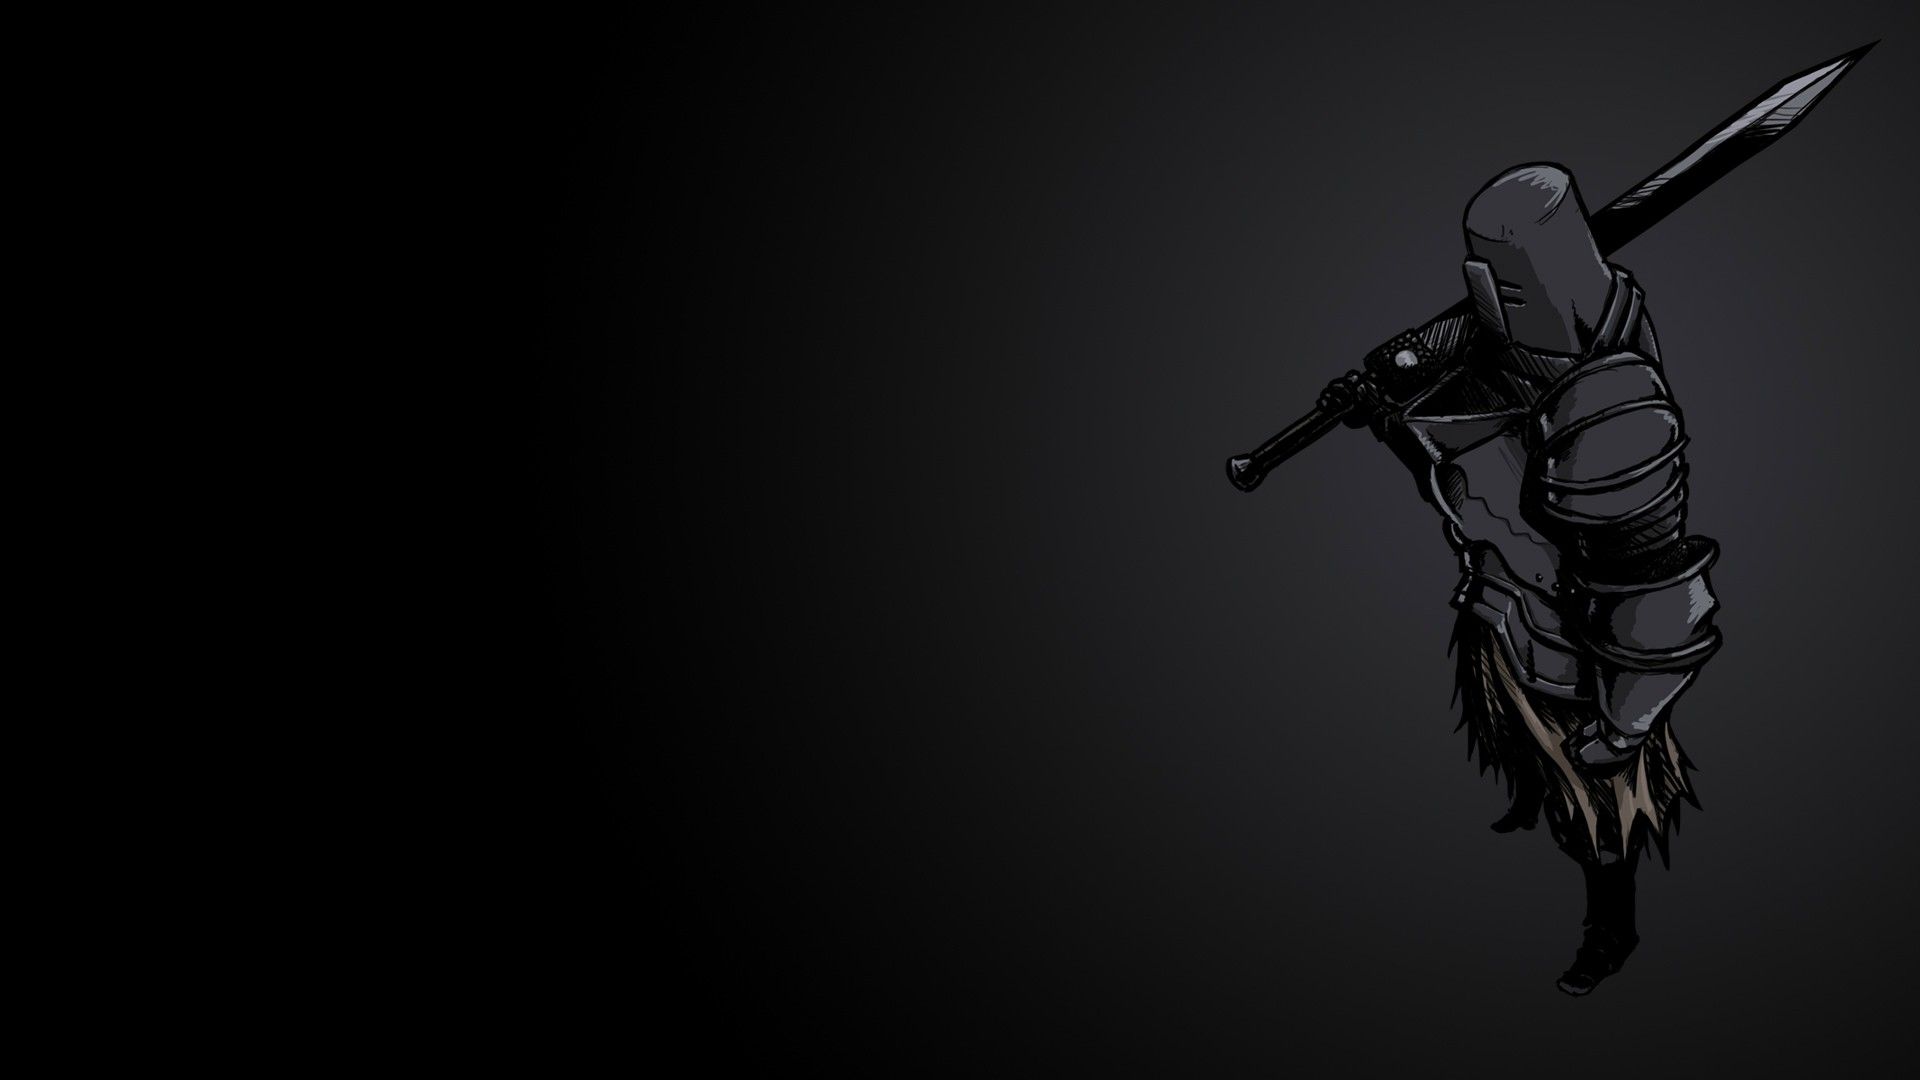 1920x1080 backgrounds #21